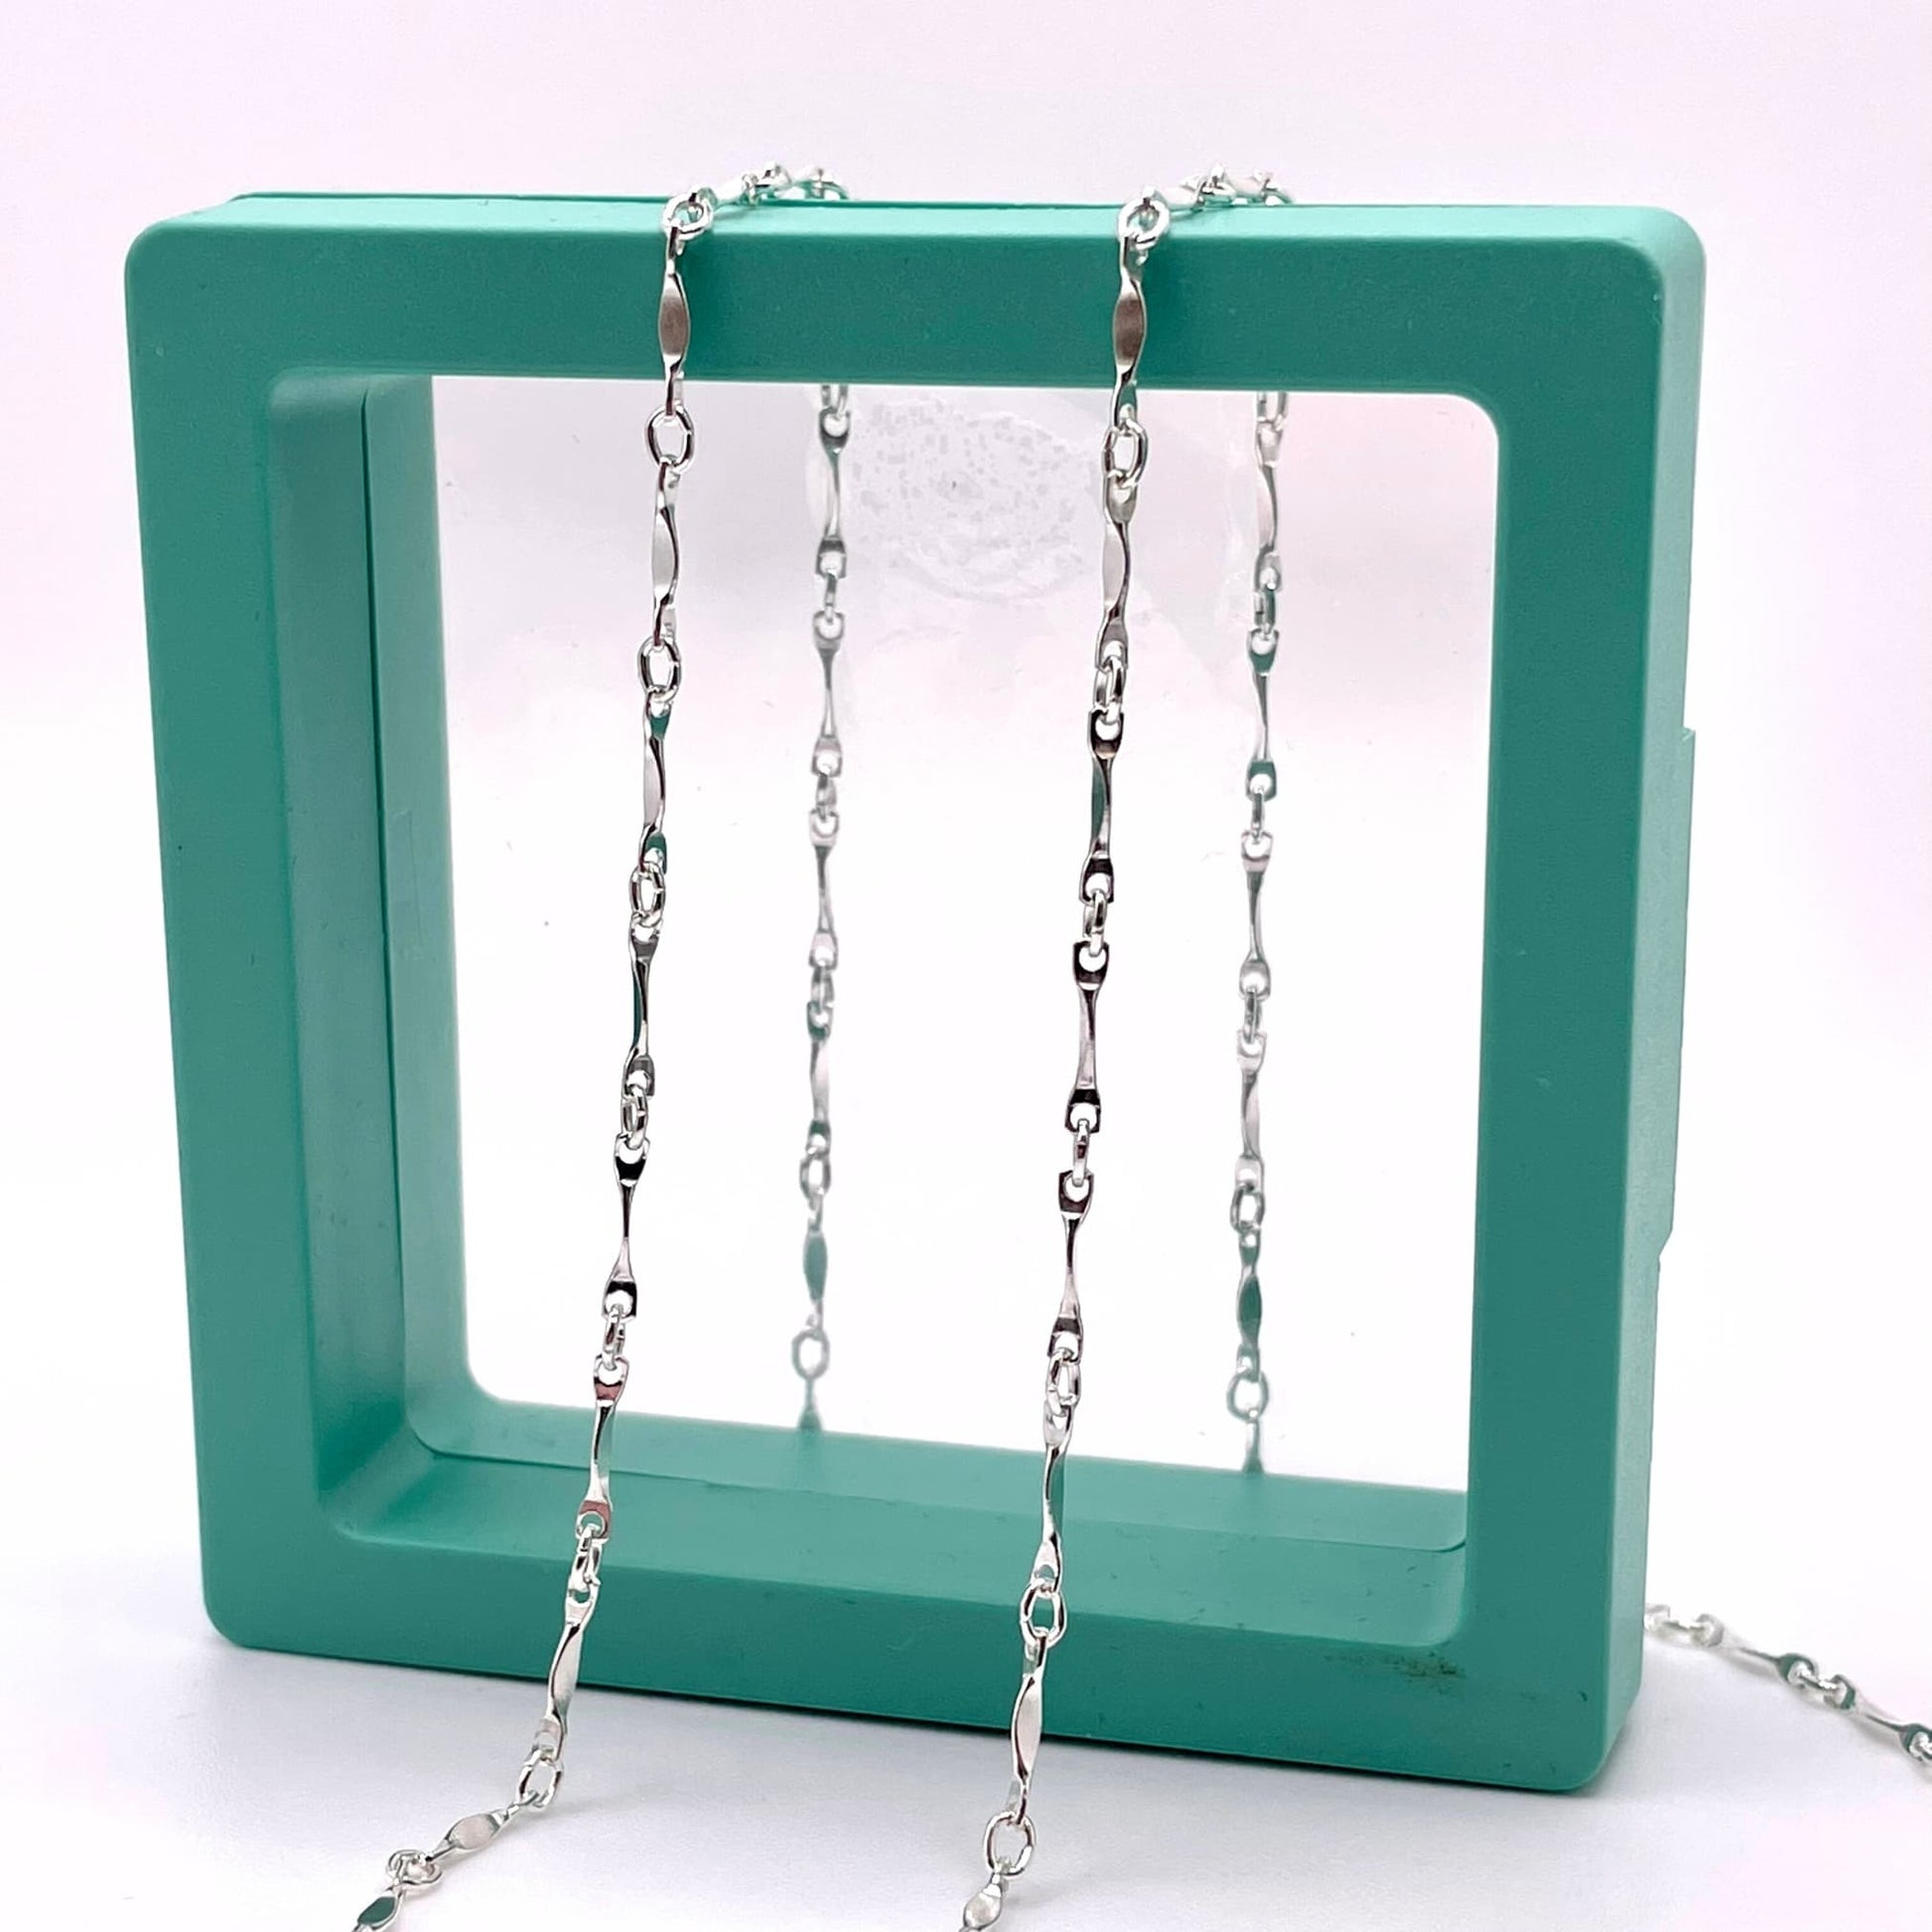 Sterling silver dapped bar chain for permanent jewelry in a hallow green box.